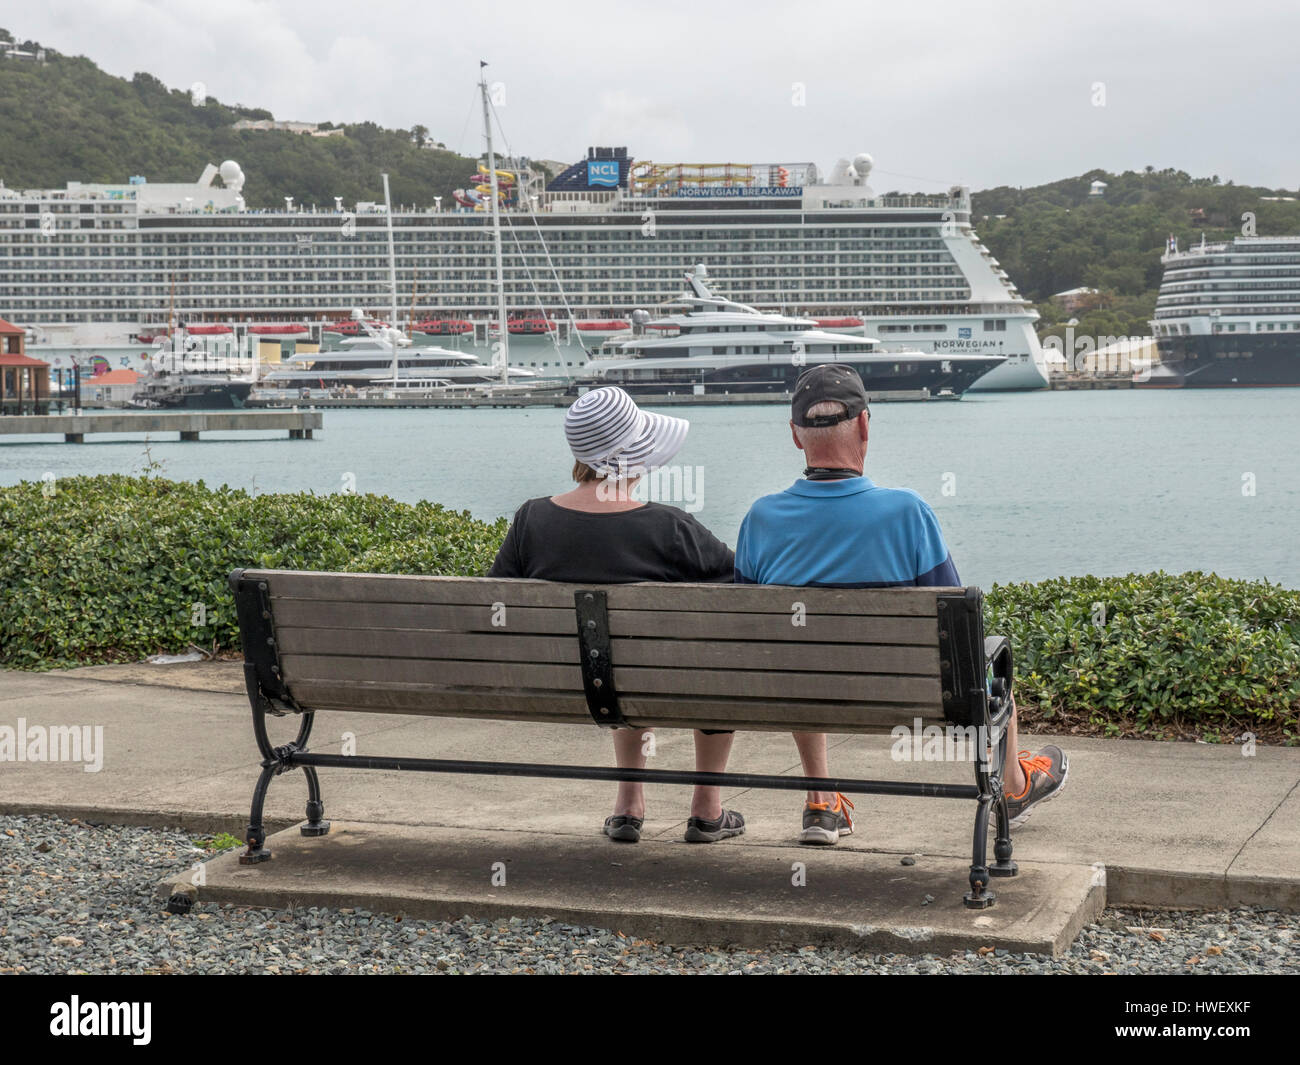 A Retired Couple On Their Way Back To The Cruise Ship Sit Down For A Rest At Yacht Haven Grande, Charlotte Amalie, St Thomas USVI Stock Photo